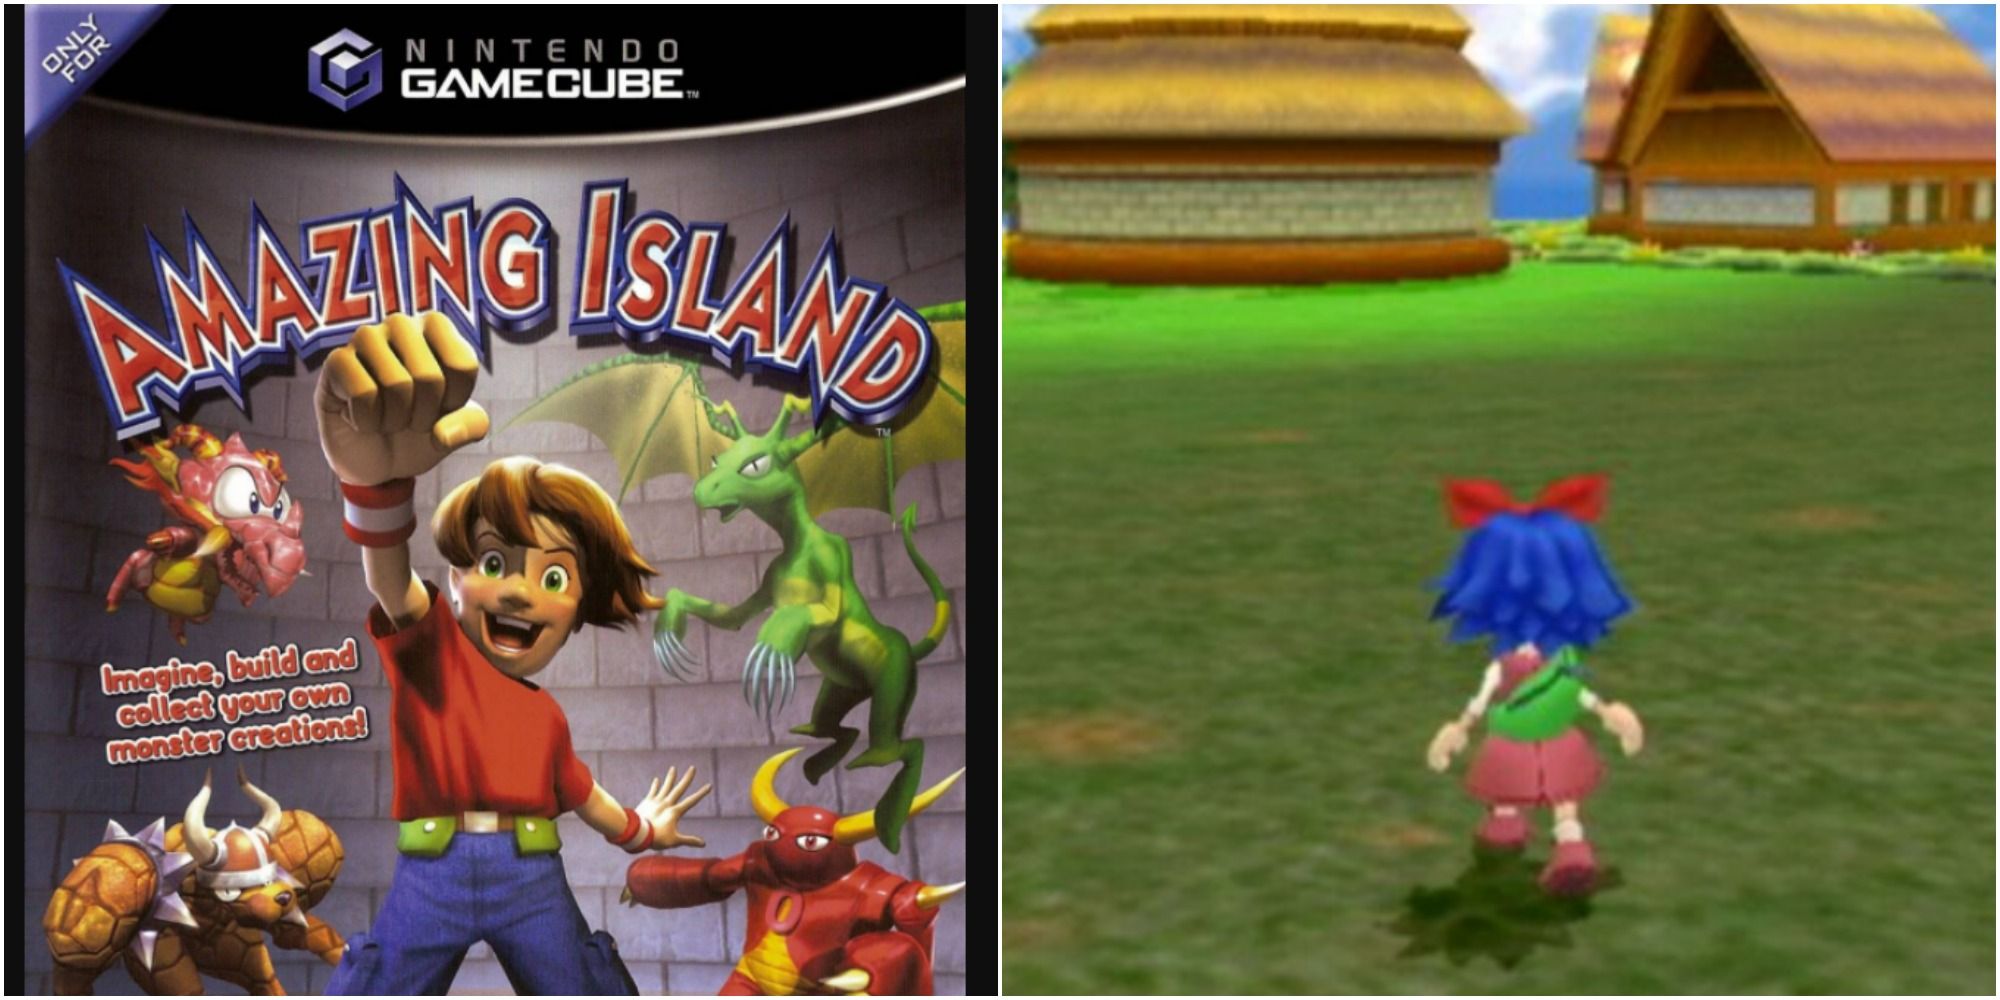 amazing island gamecube box art with character and creatures and gameplay showing a character running in village featured